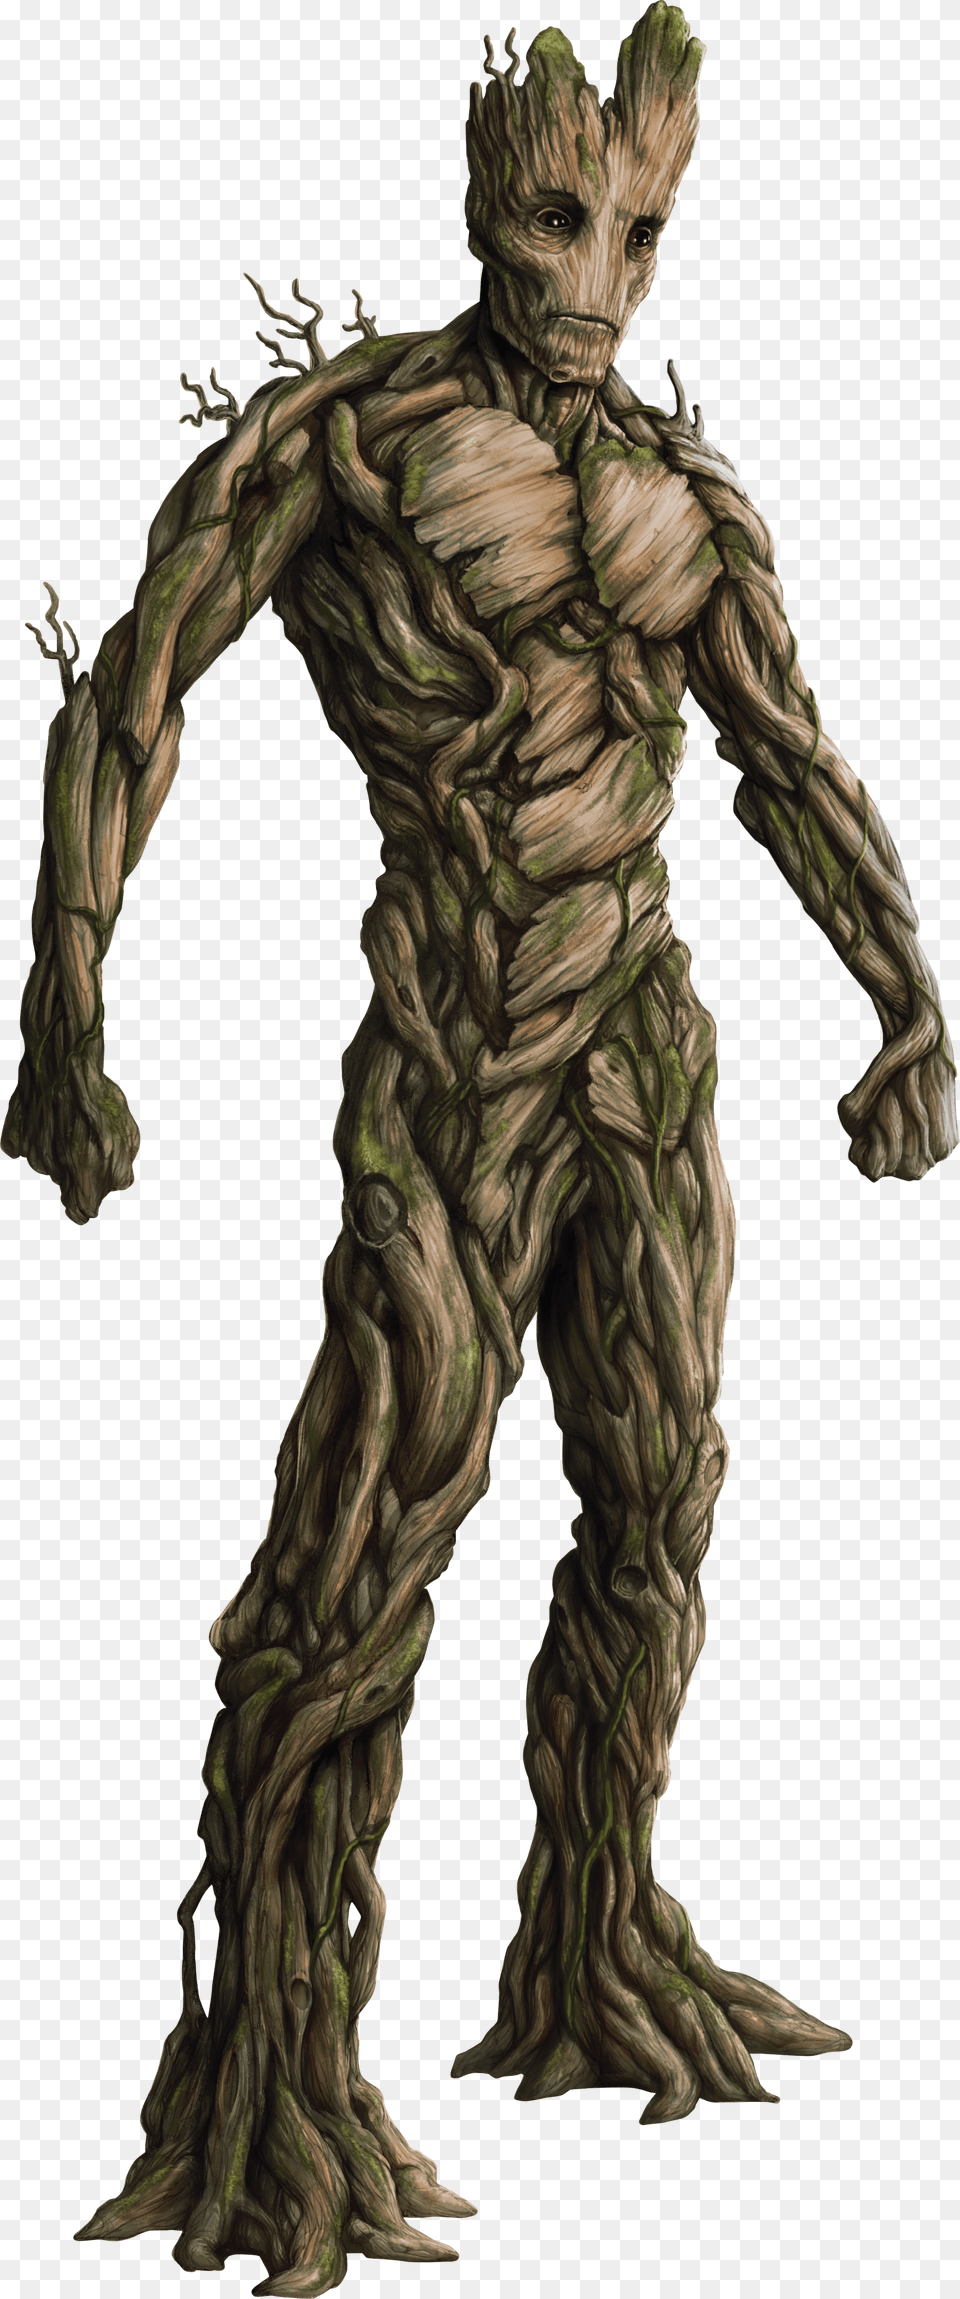 Groot Gg Fh Guardians Of The Galaxy Characters Groot Free Png Download